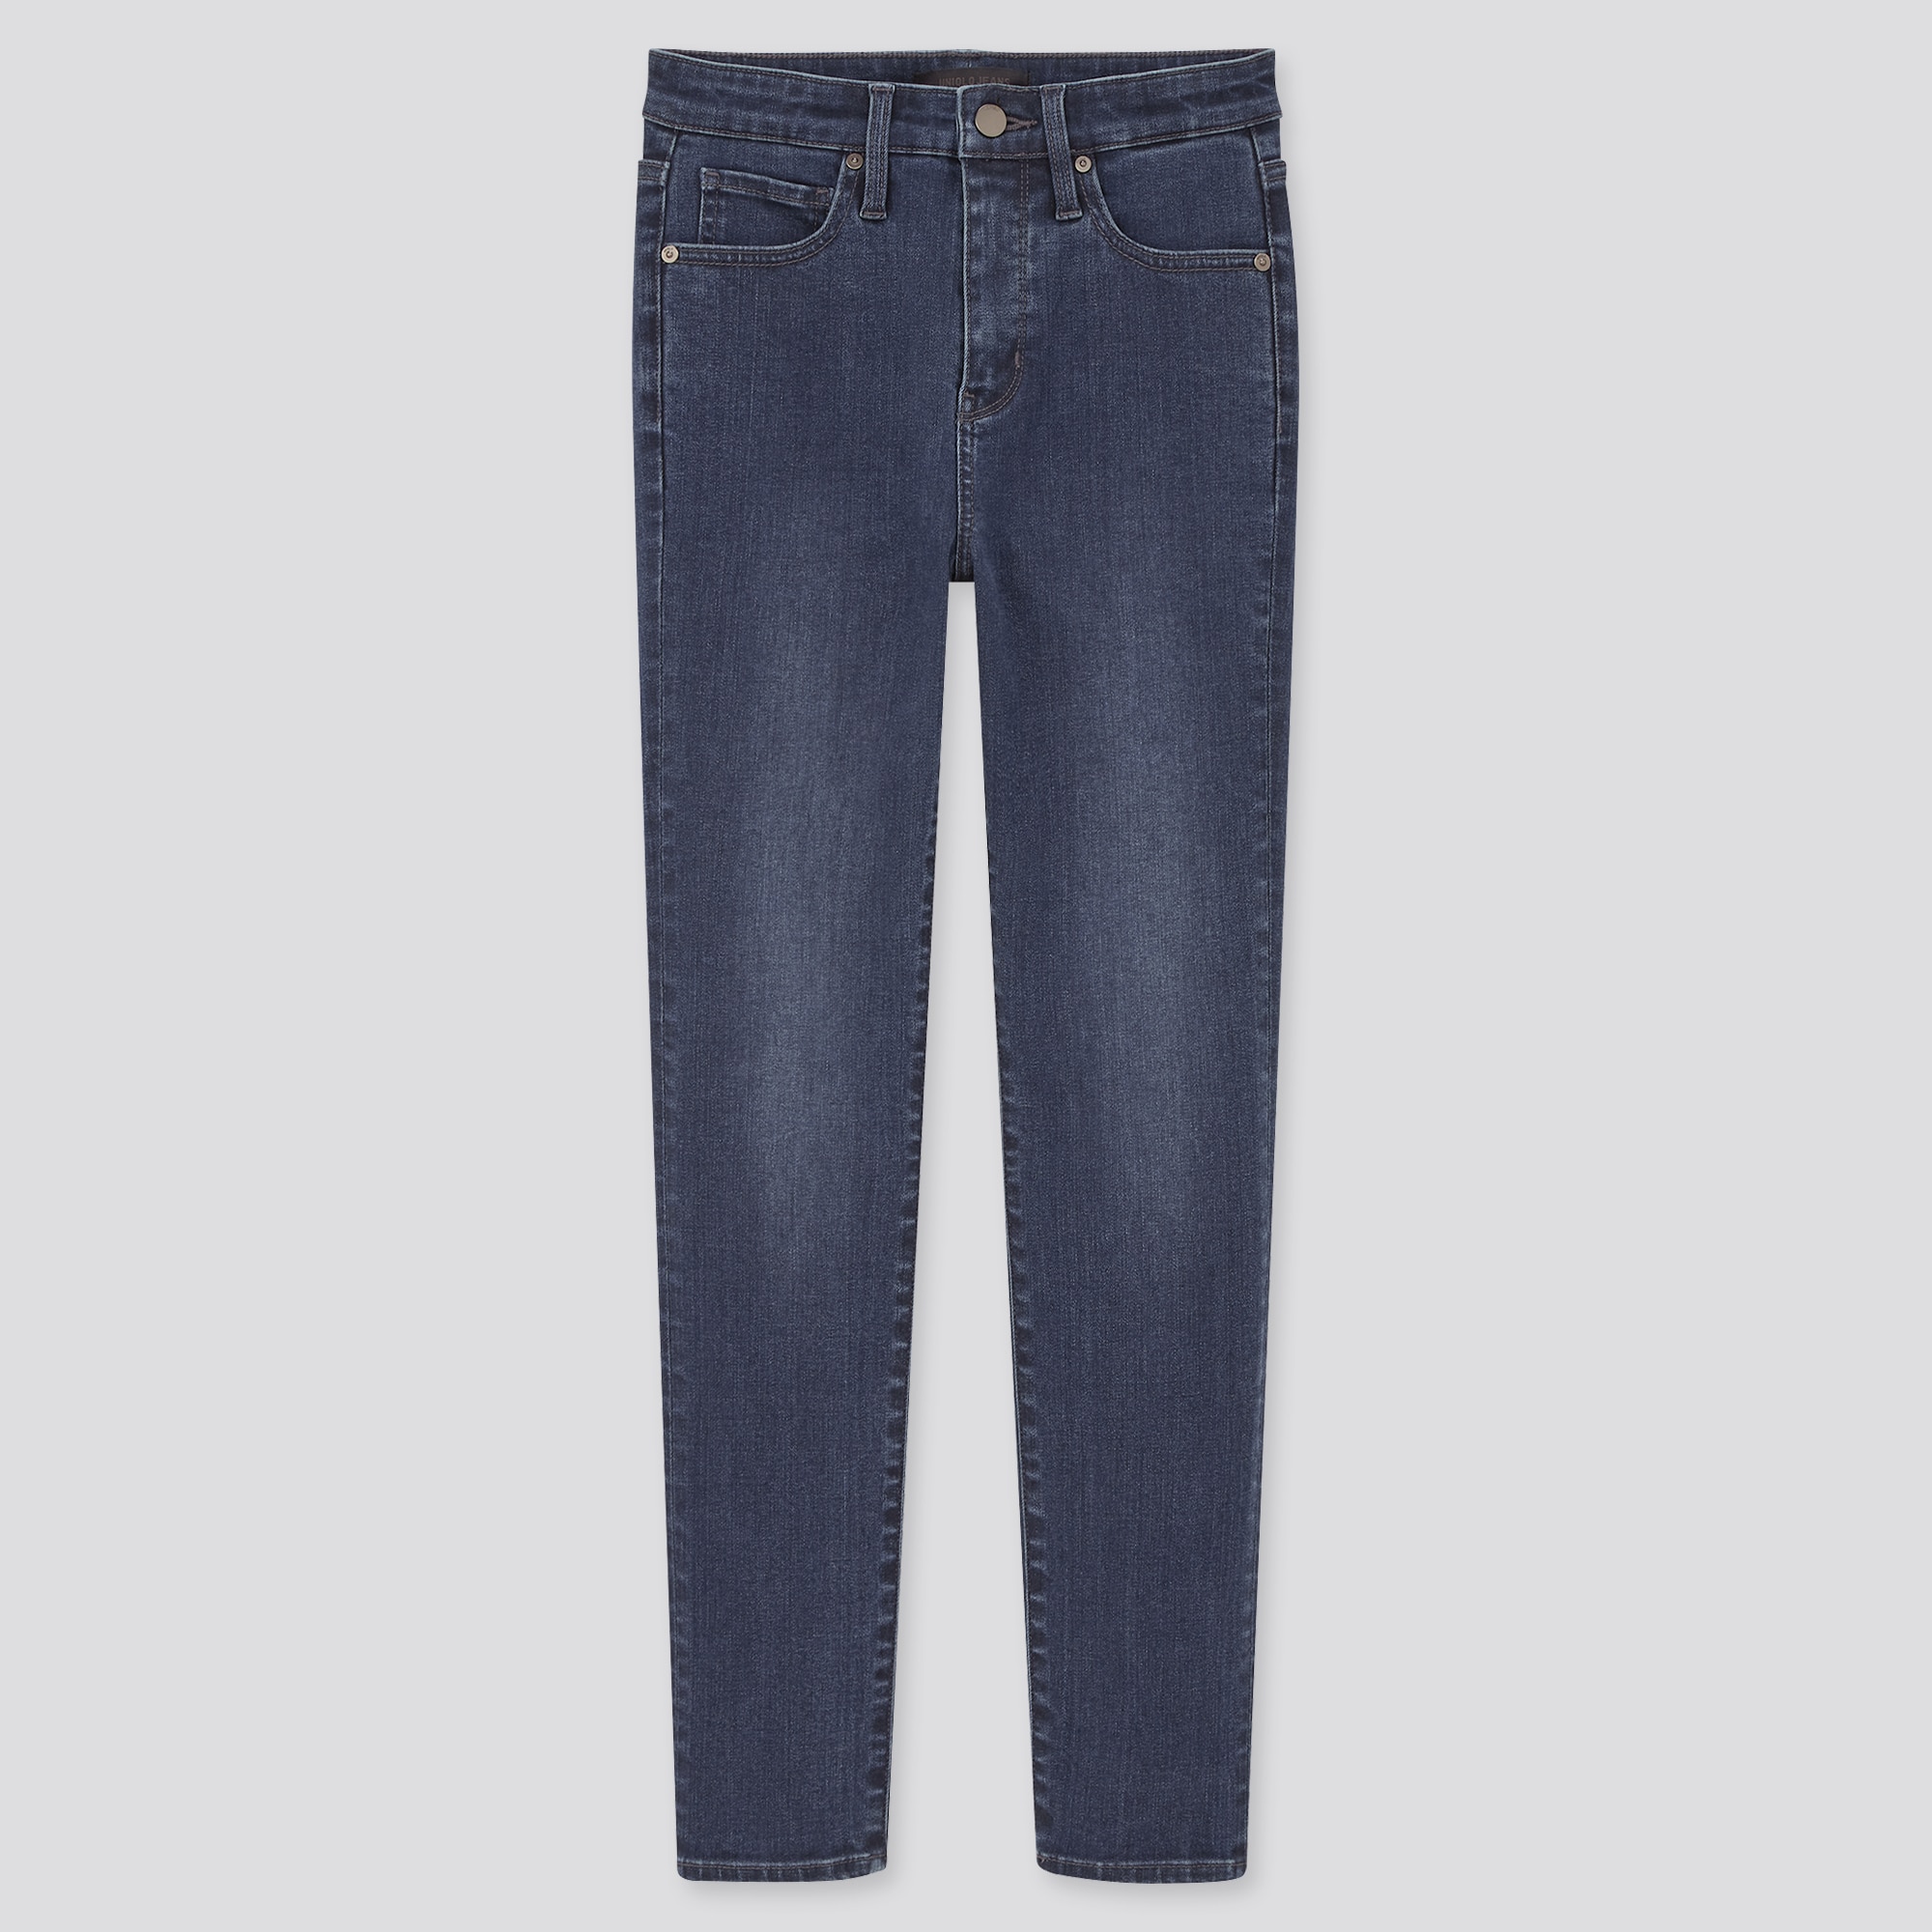 skinny fit ankle length jeans